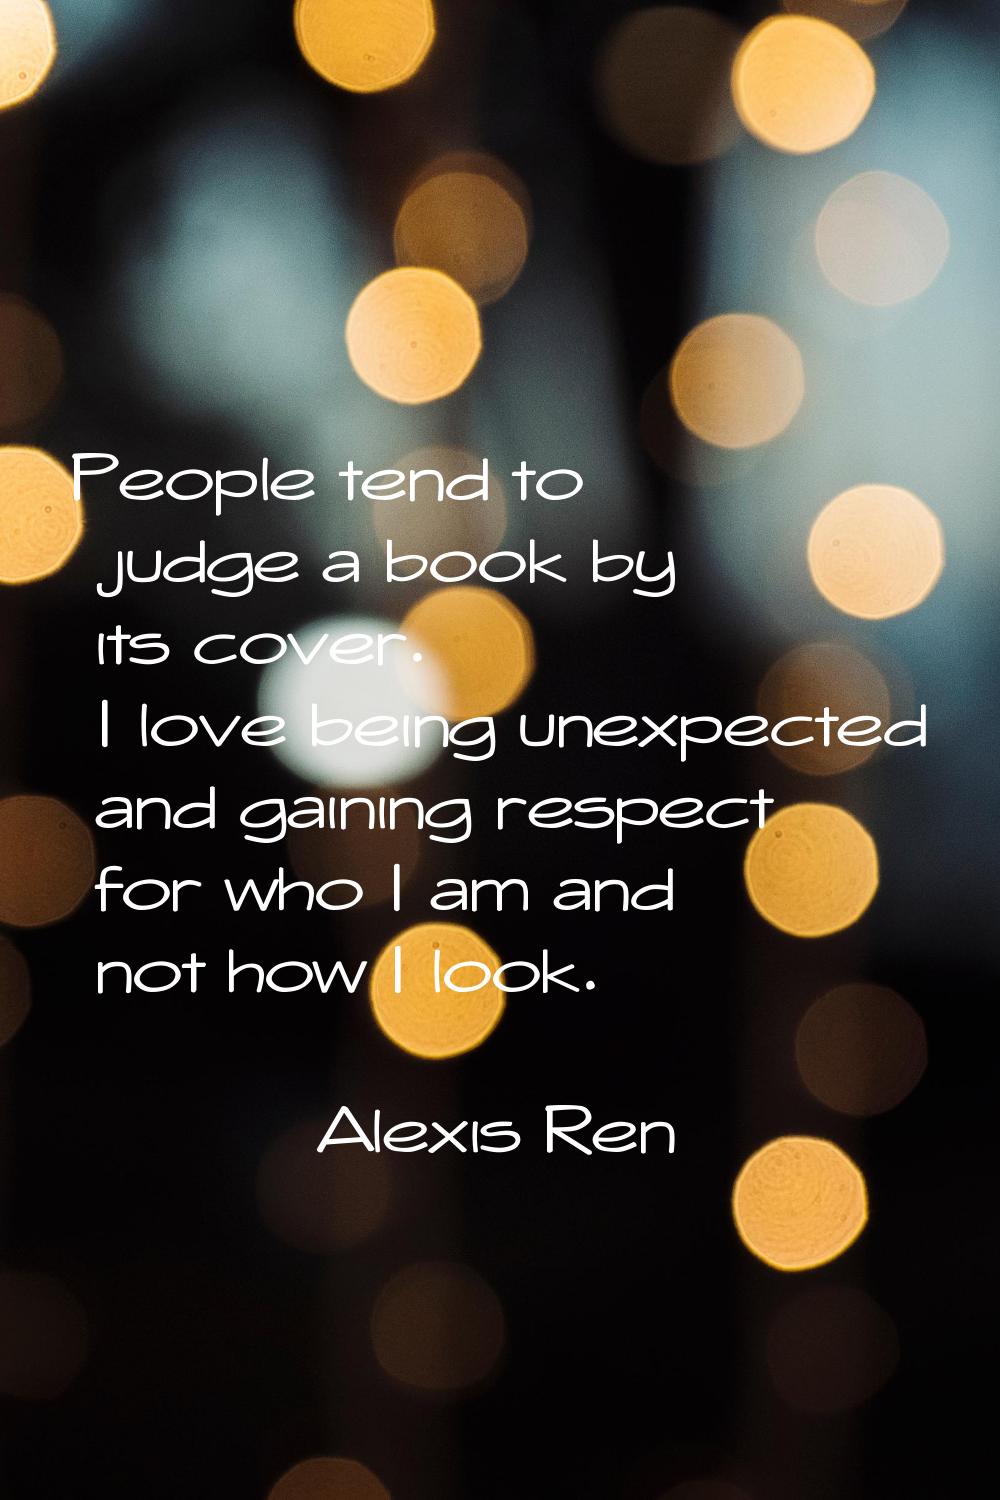 People tend to judge a book by its cover. I love being unexpected and gaining respect for who I am 